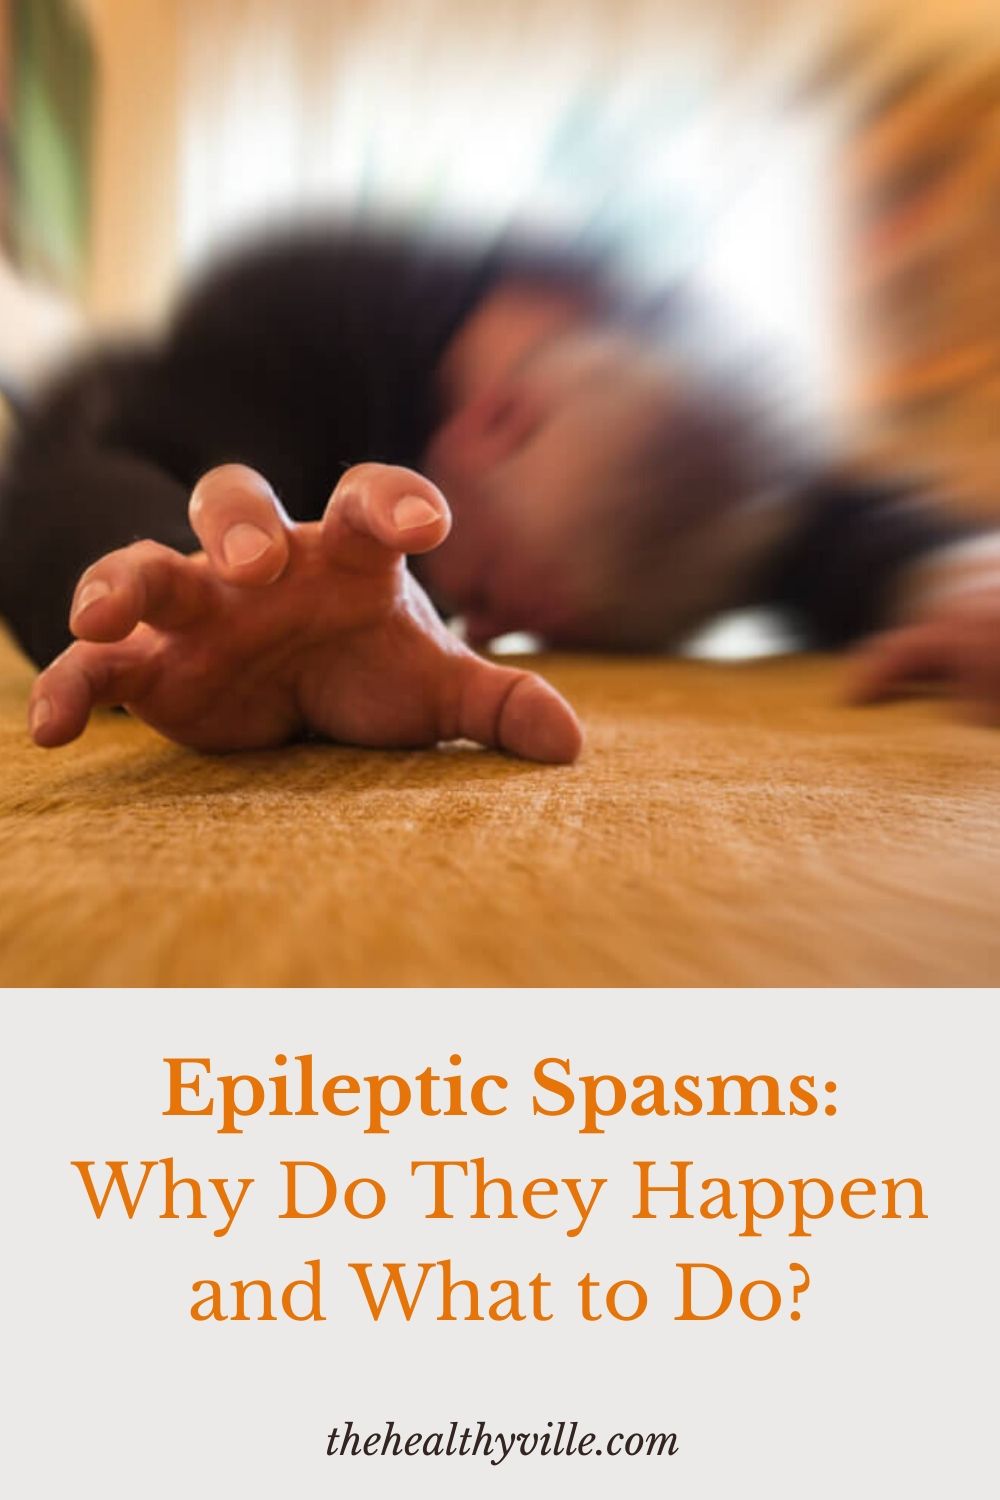 Epileptic Spasms: Why Do They Happen and What to Do?